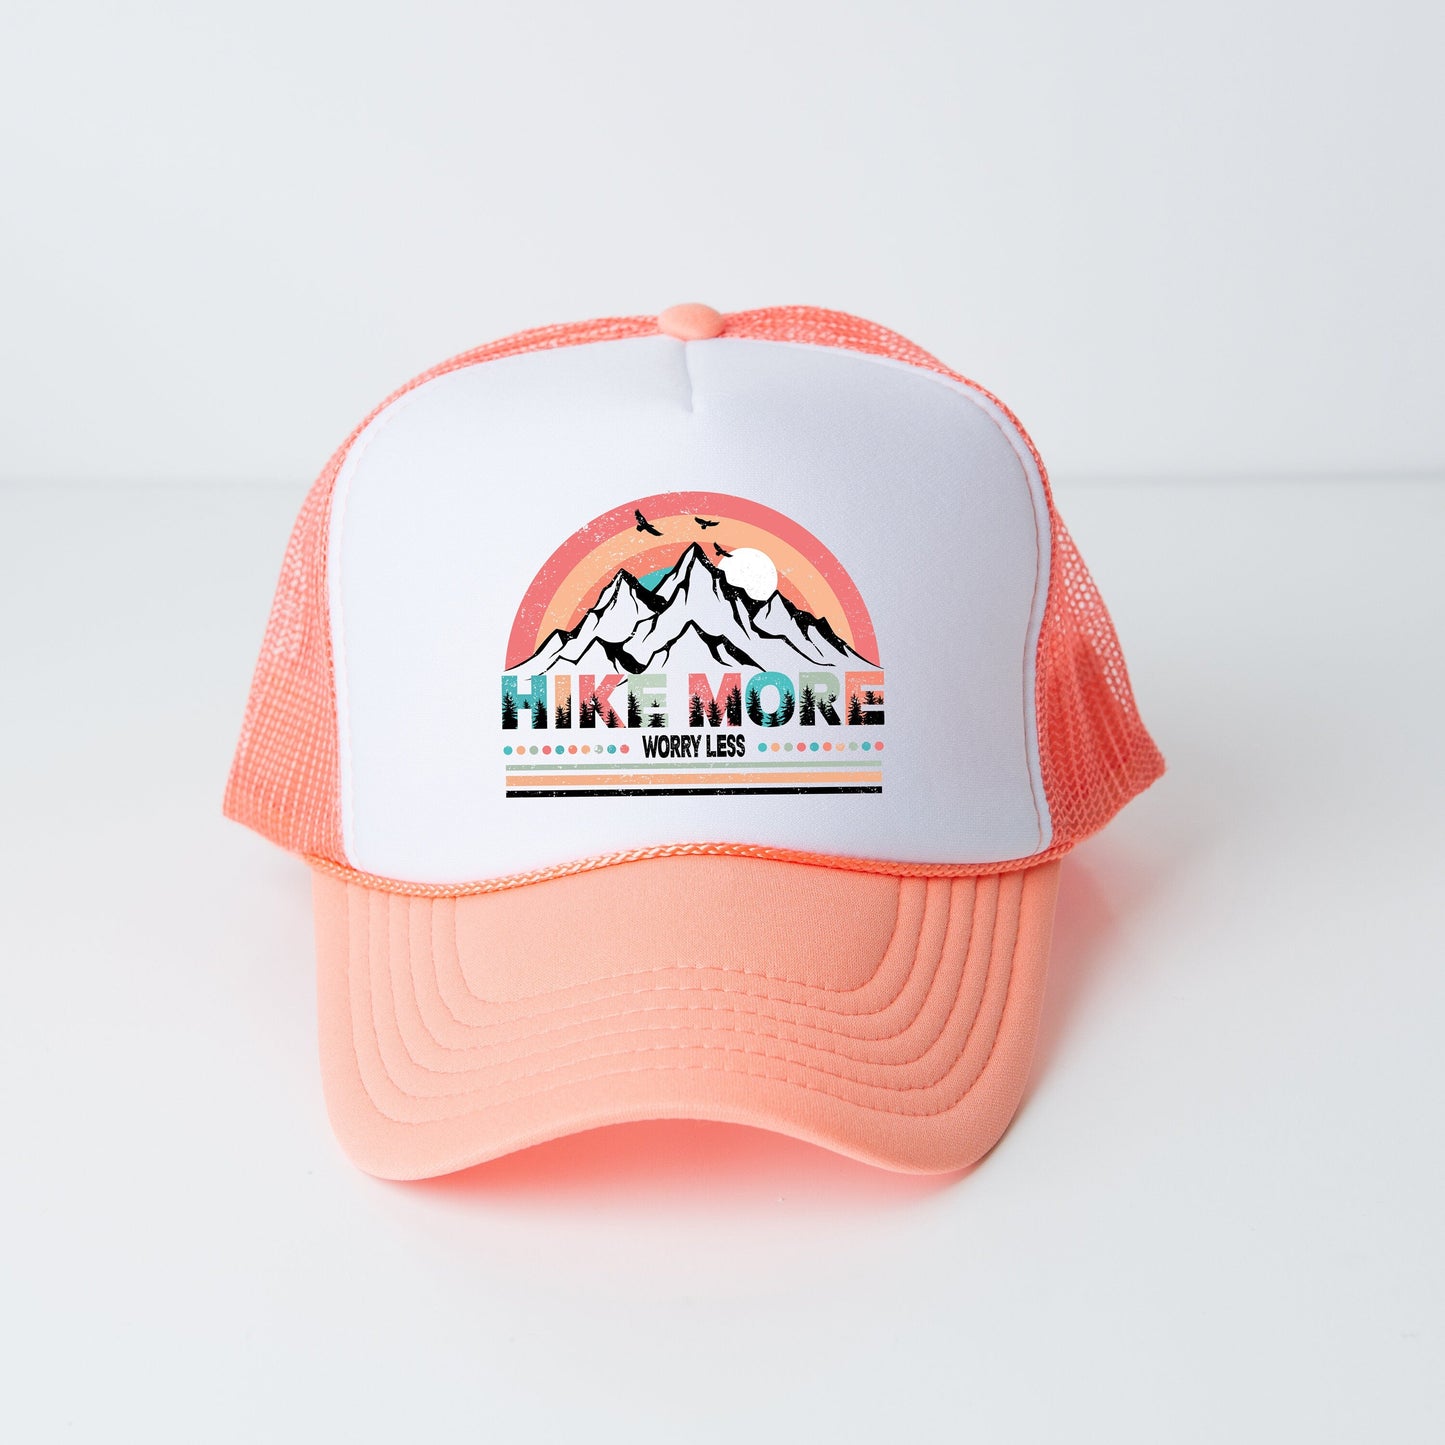 a pink and white trucker hat with a mountain scene